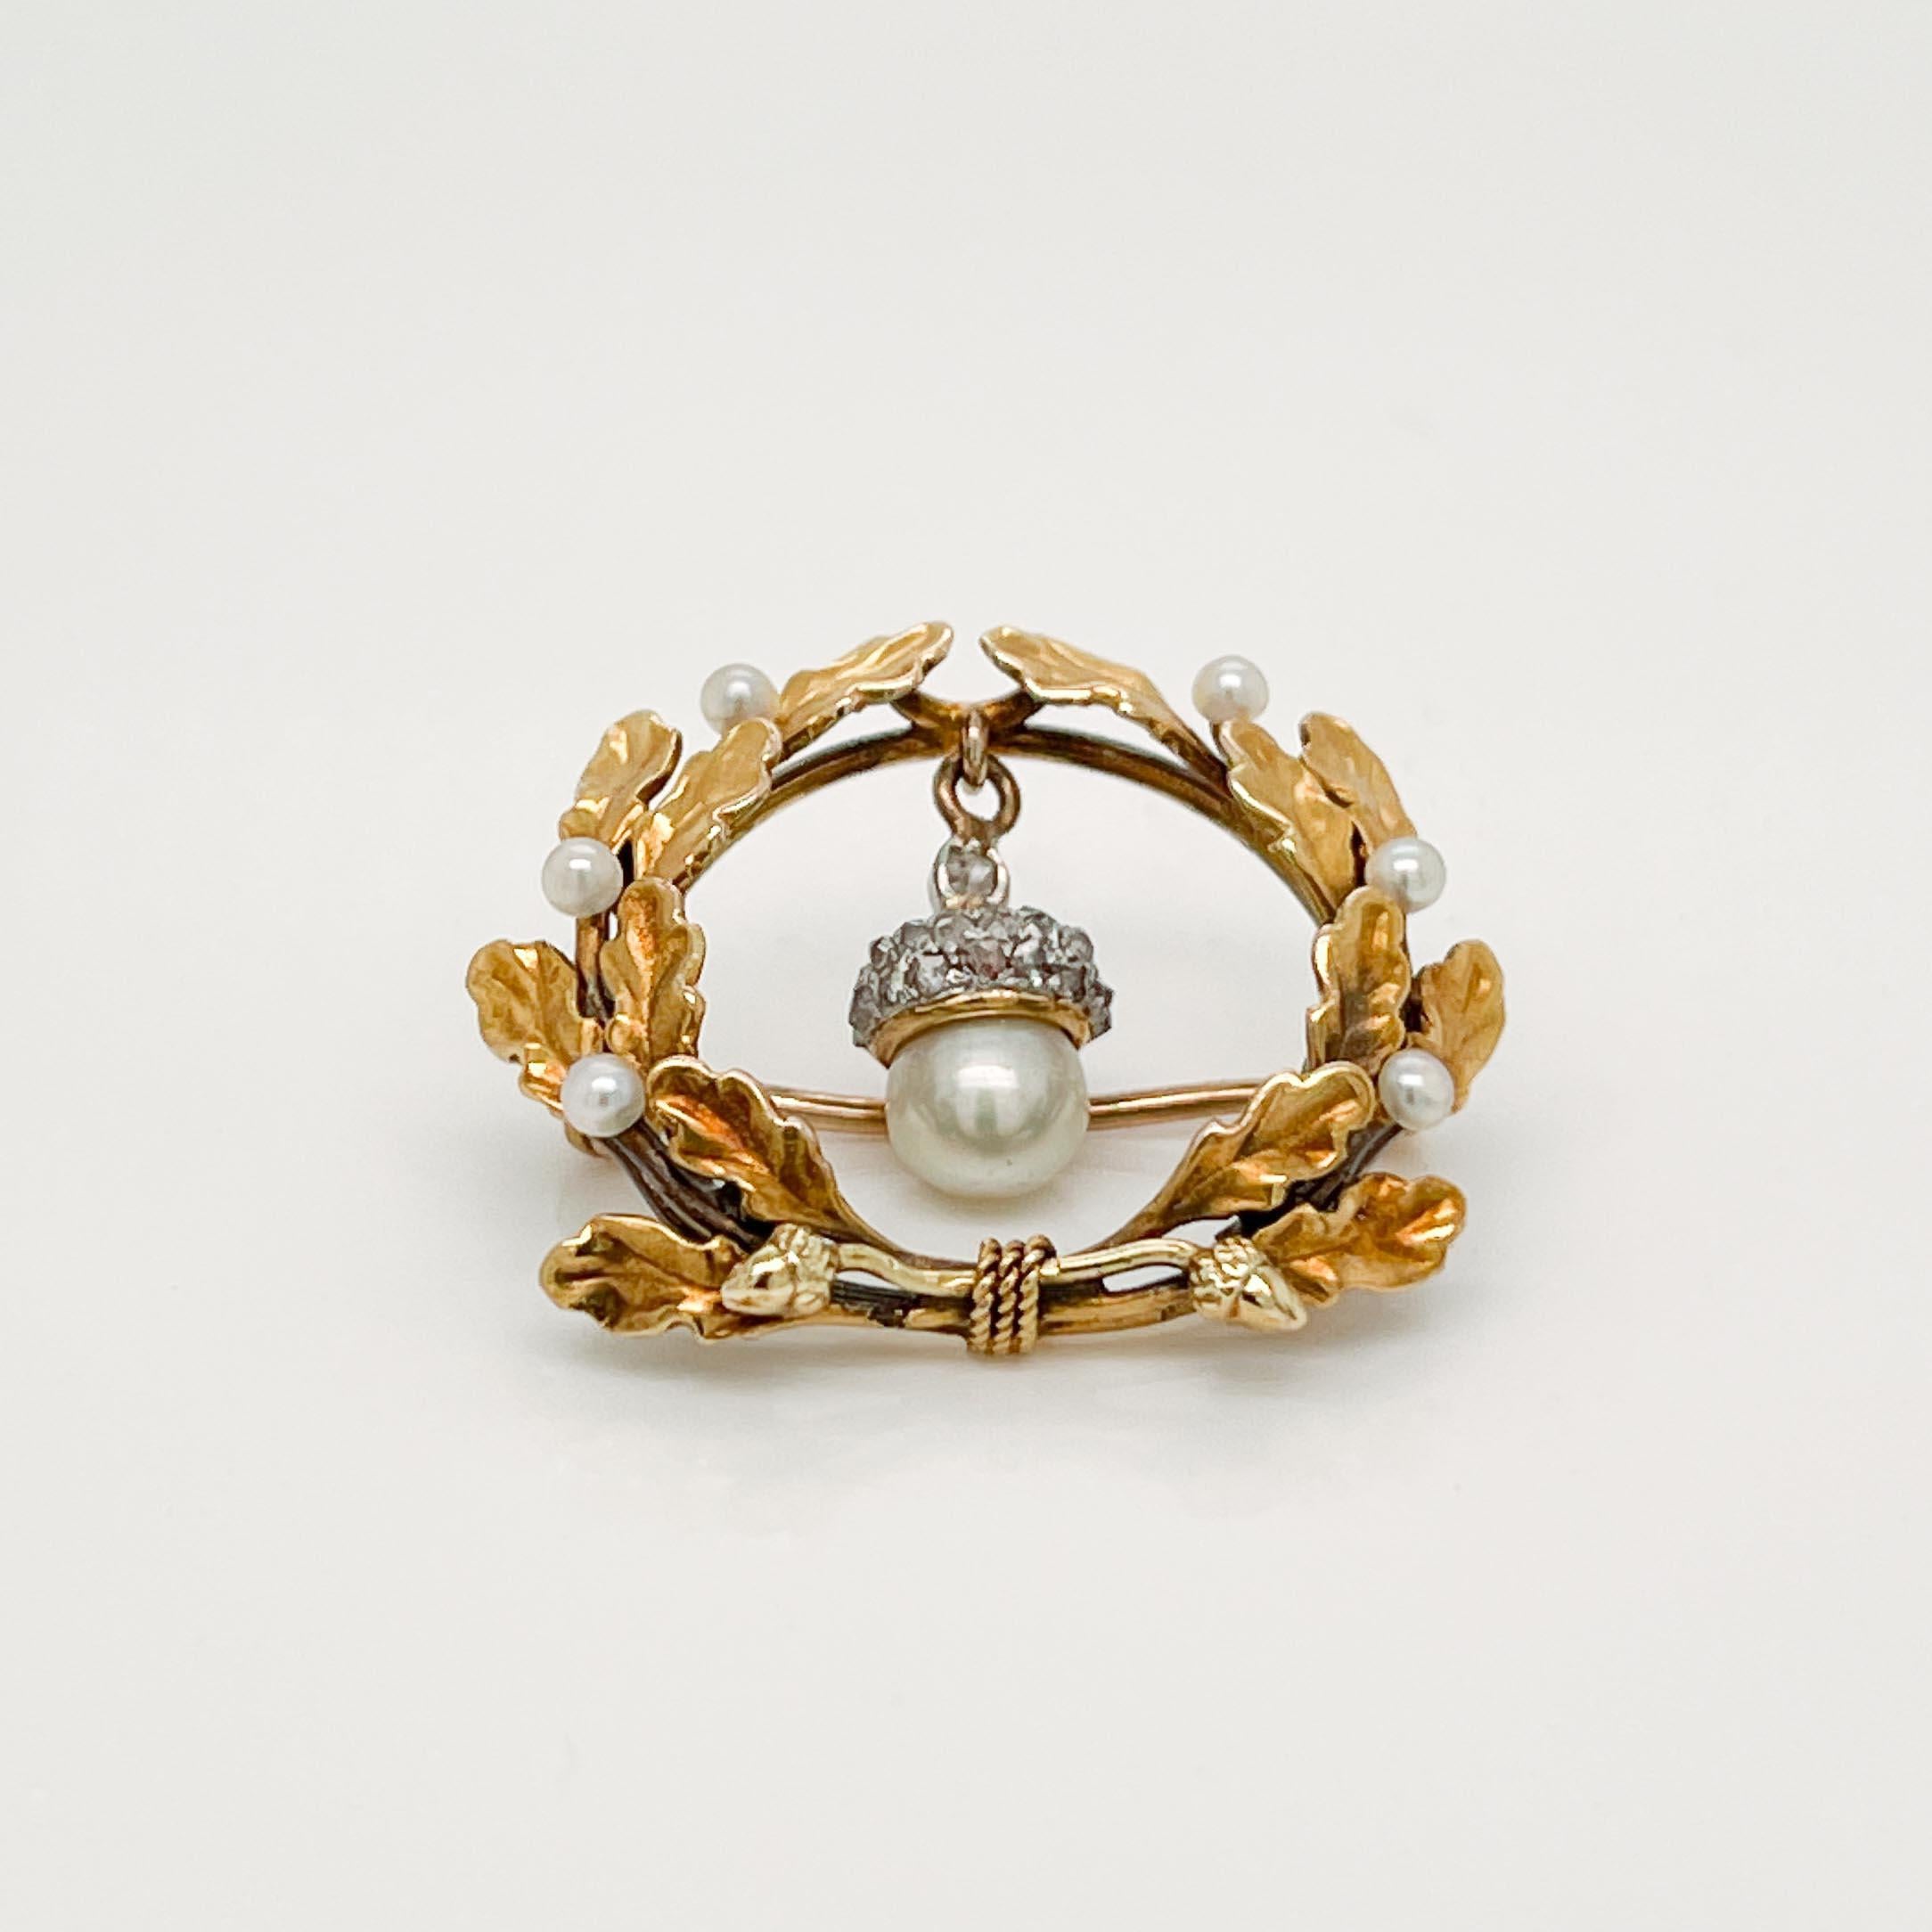 A fine signed antique Edwardian brooch by Krementz. 

In 14k gold. 

In the form of a wreath of oak leaves offset by seed pearls. The wreath supports a figural acorn drop comprised of a pearl bottom & a diamond encrusted top. Small cords with acorn